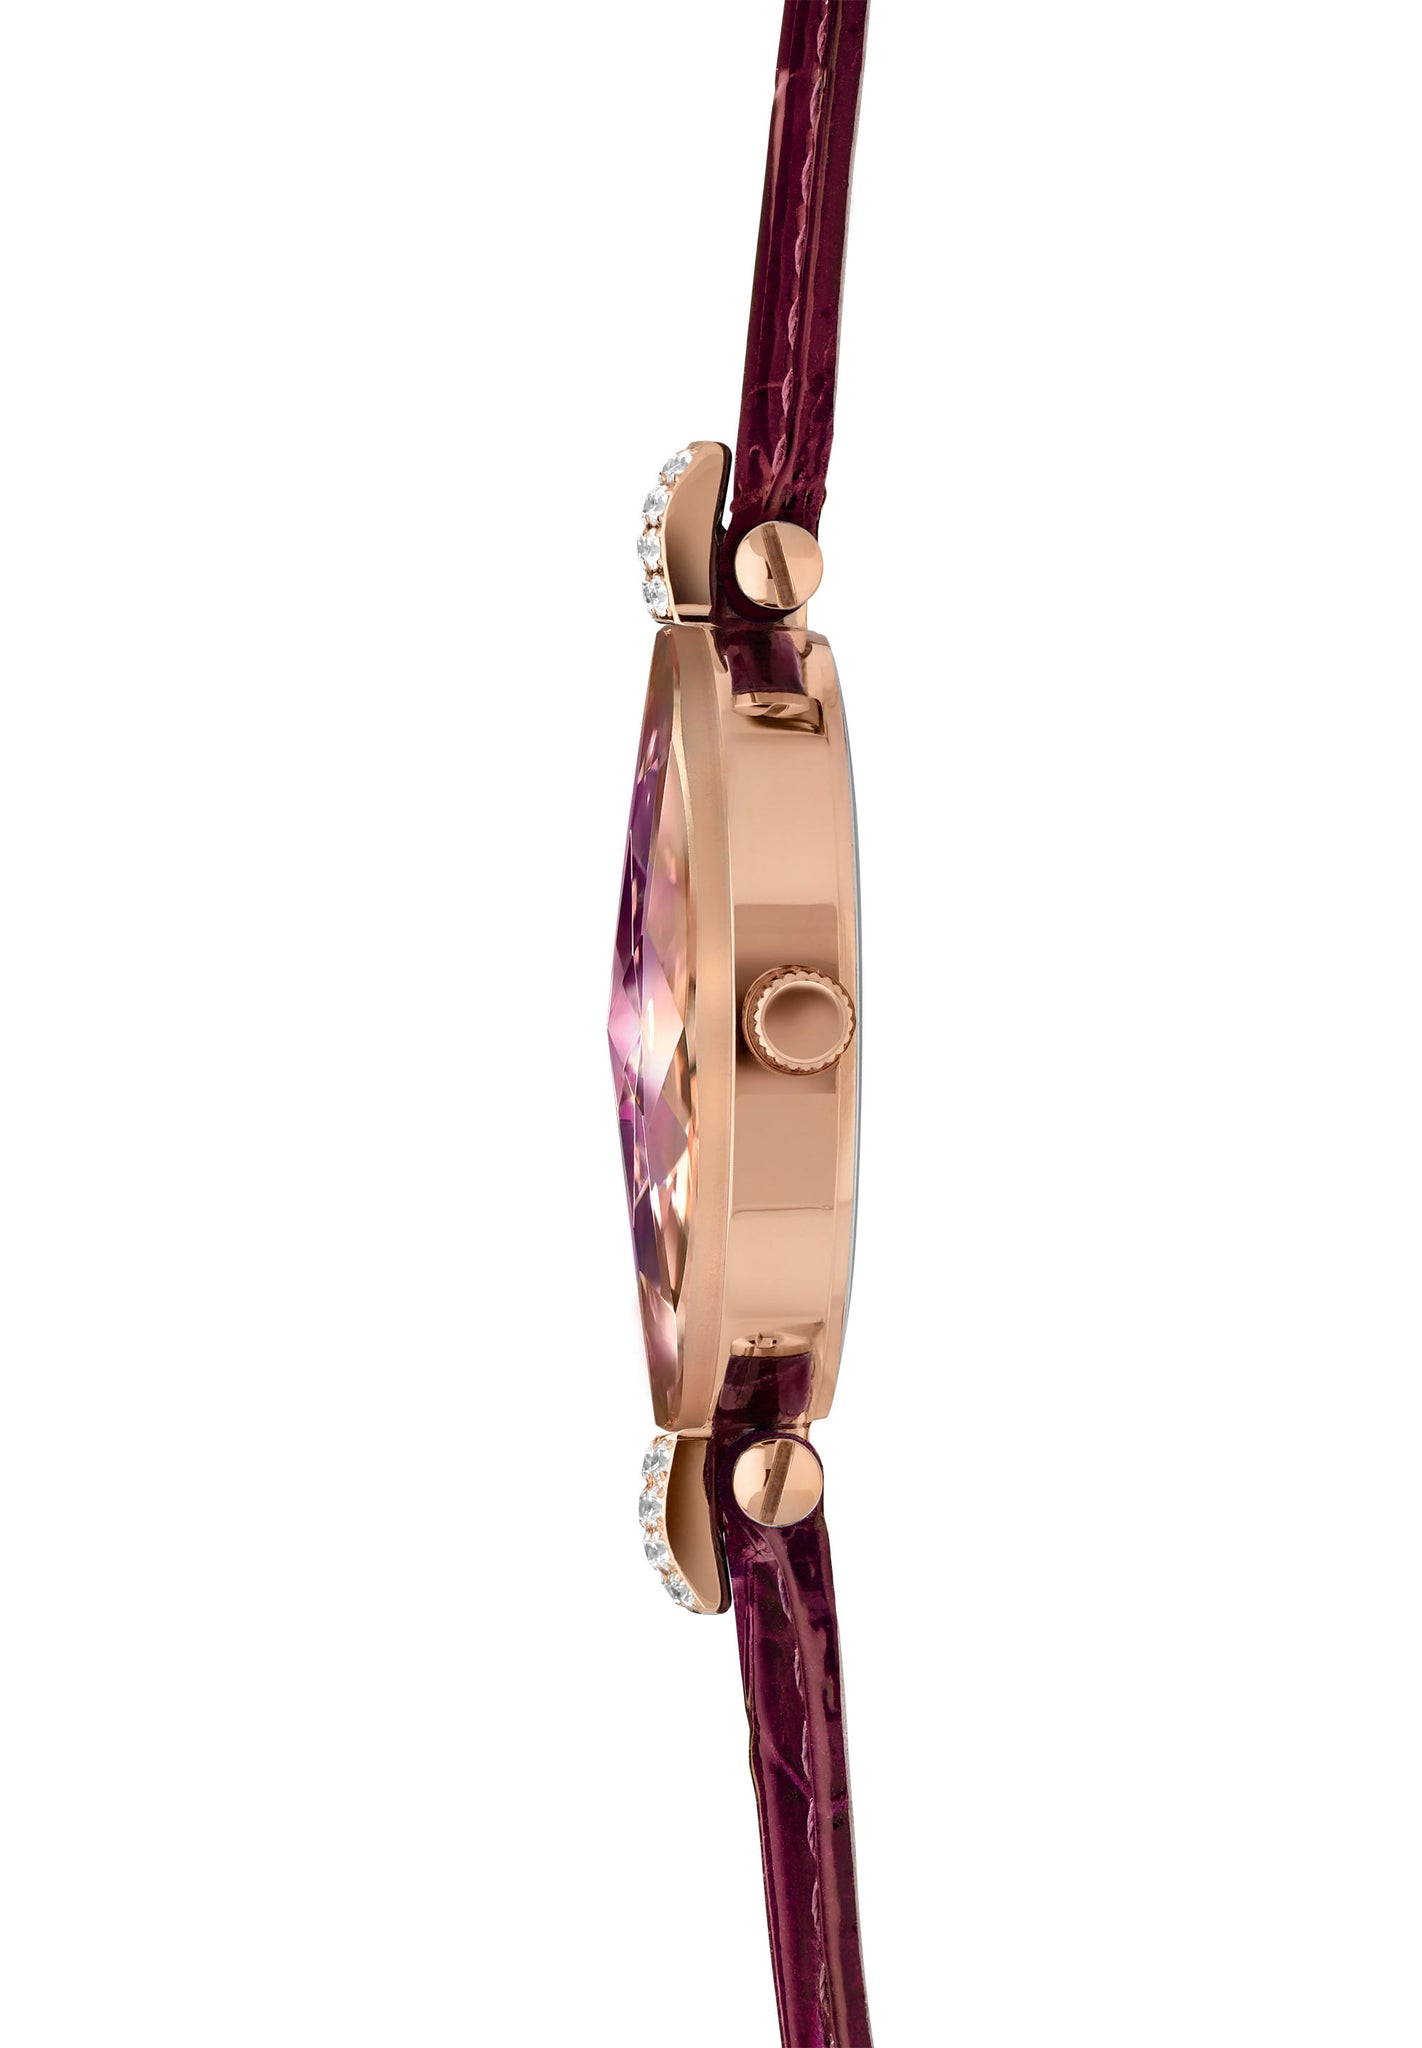 Facet Strass Reloj Mujer Suizo J5.771.M